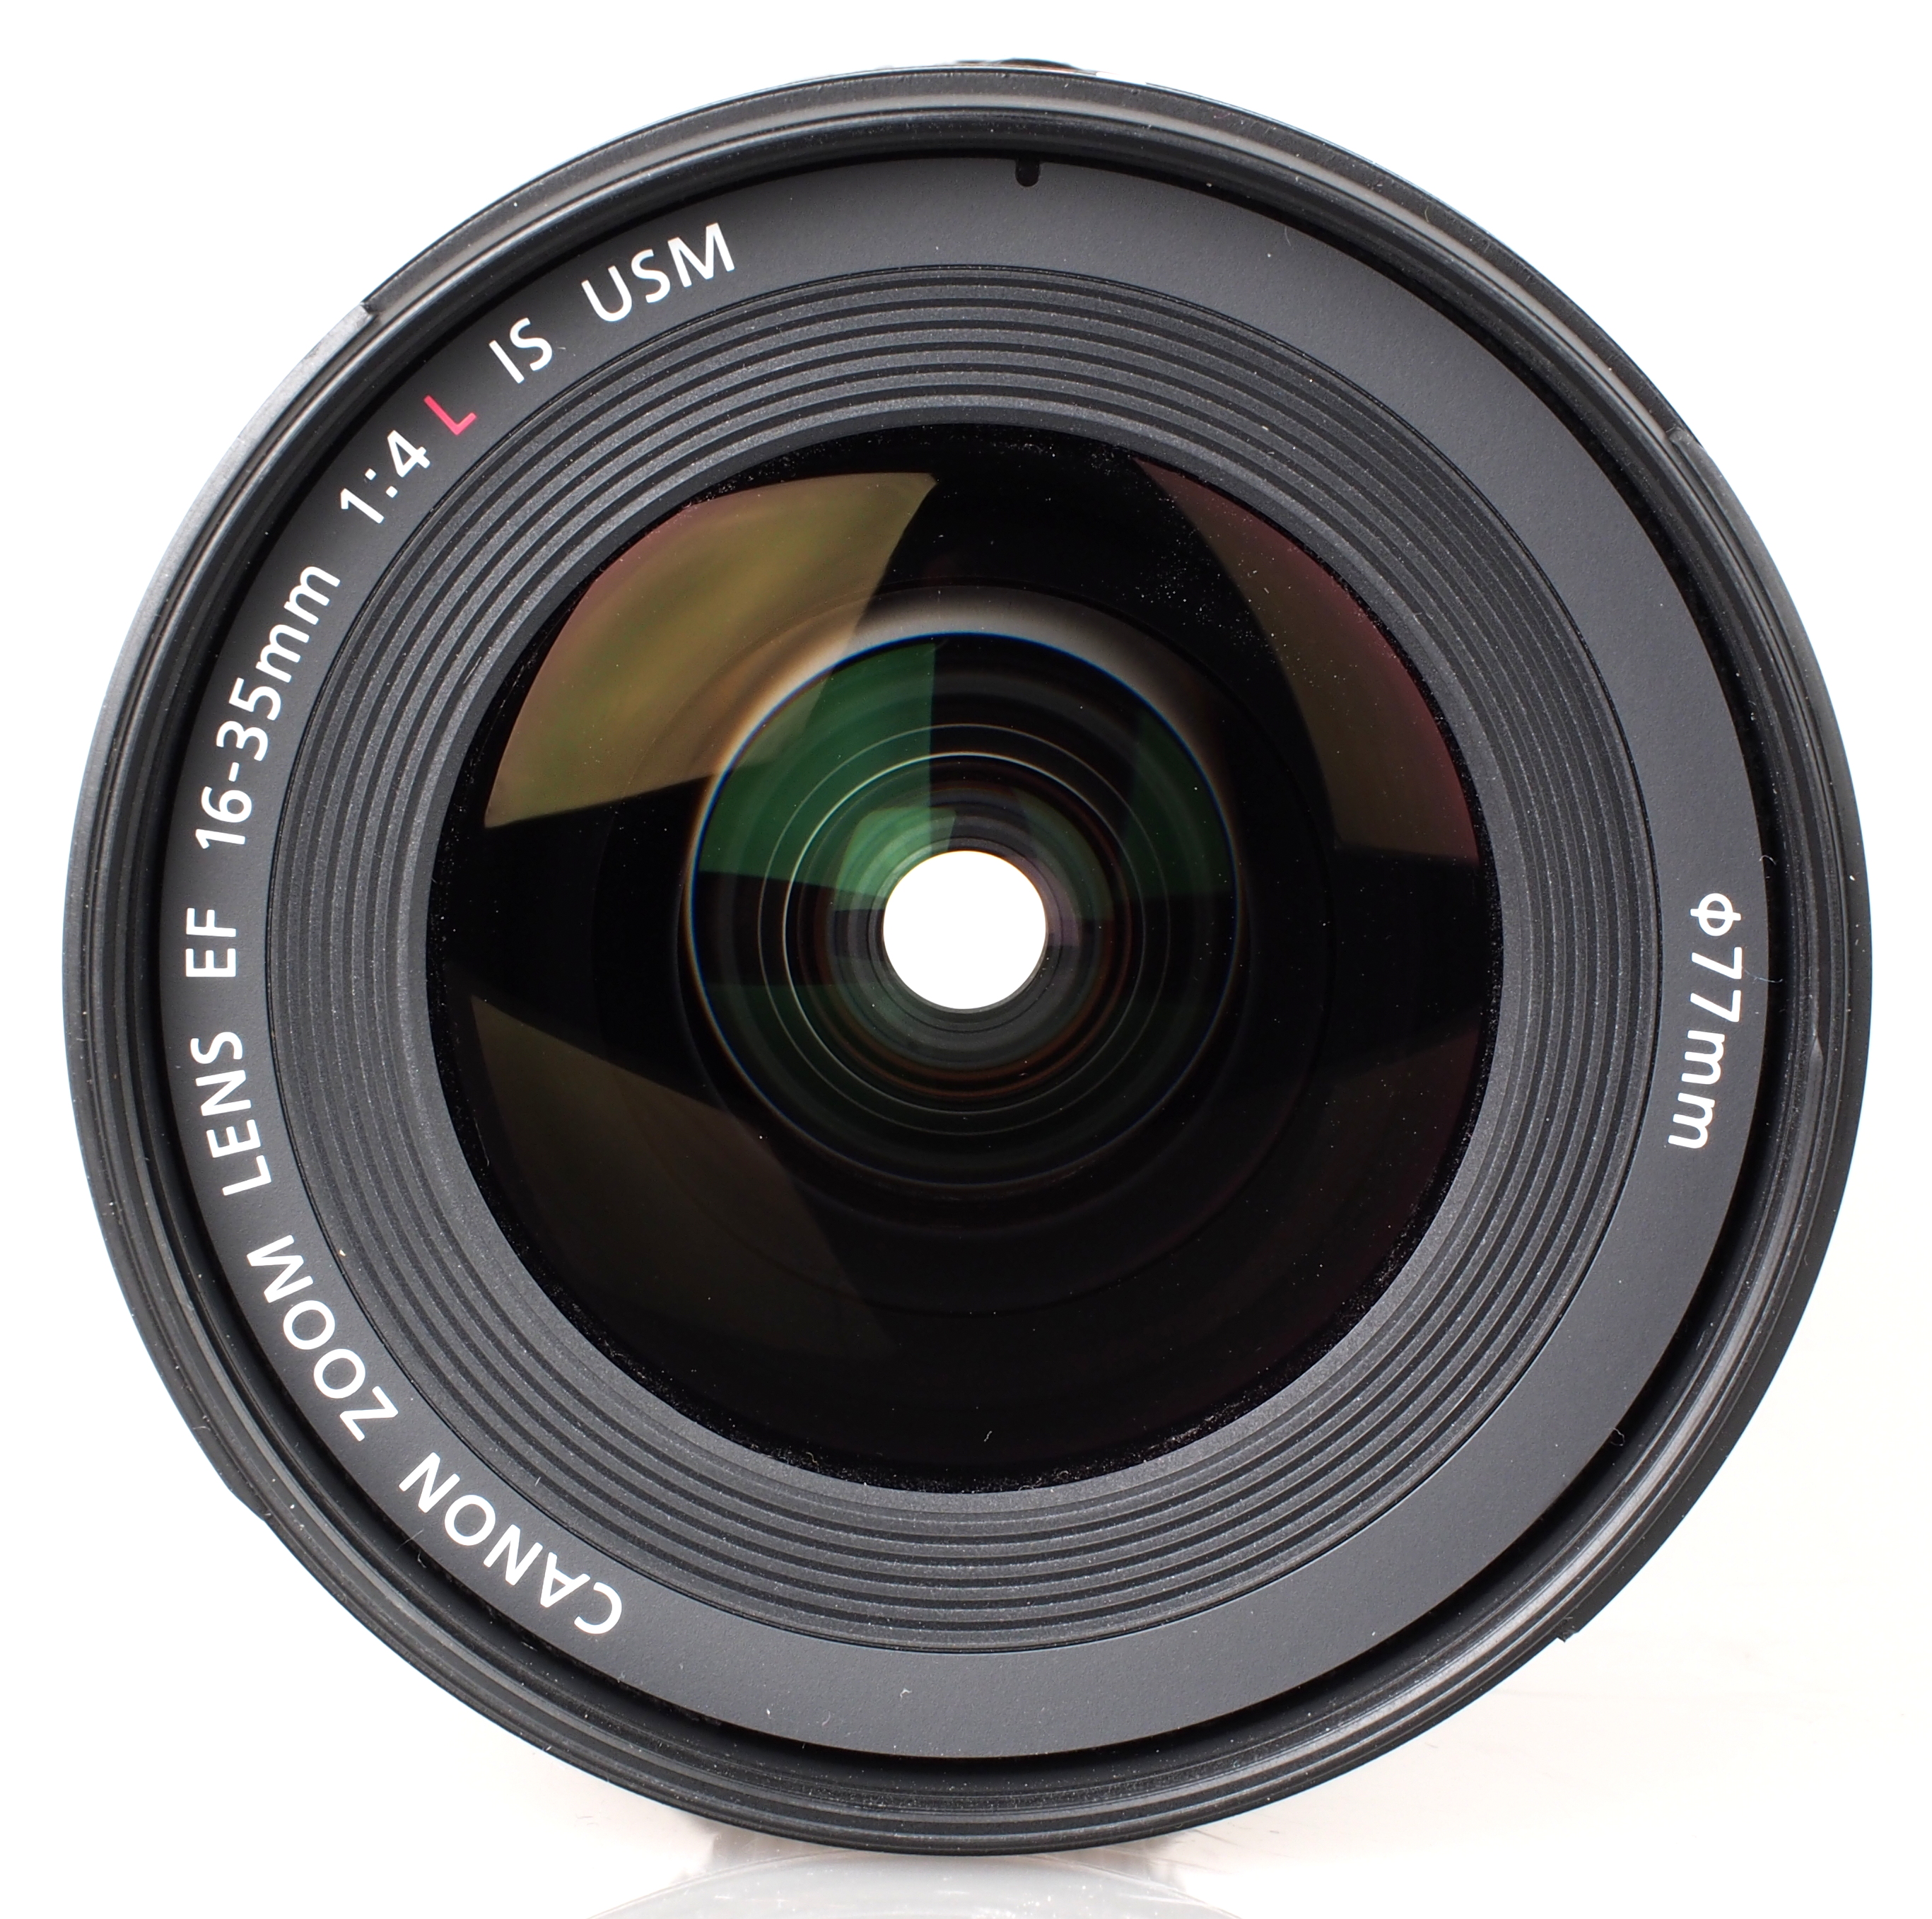 Canon EF 16-35mm f/4 L IS USM Lens Review